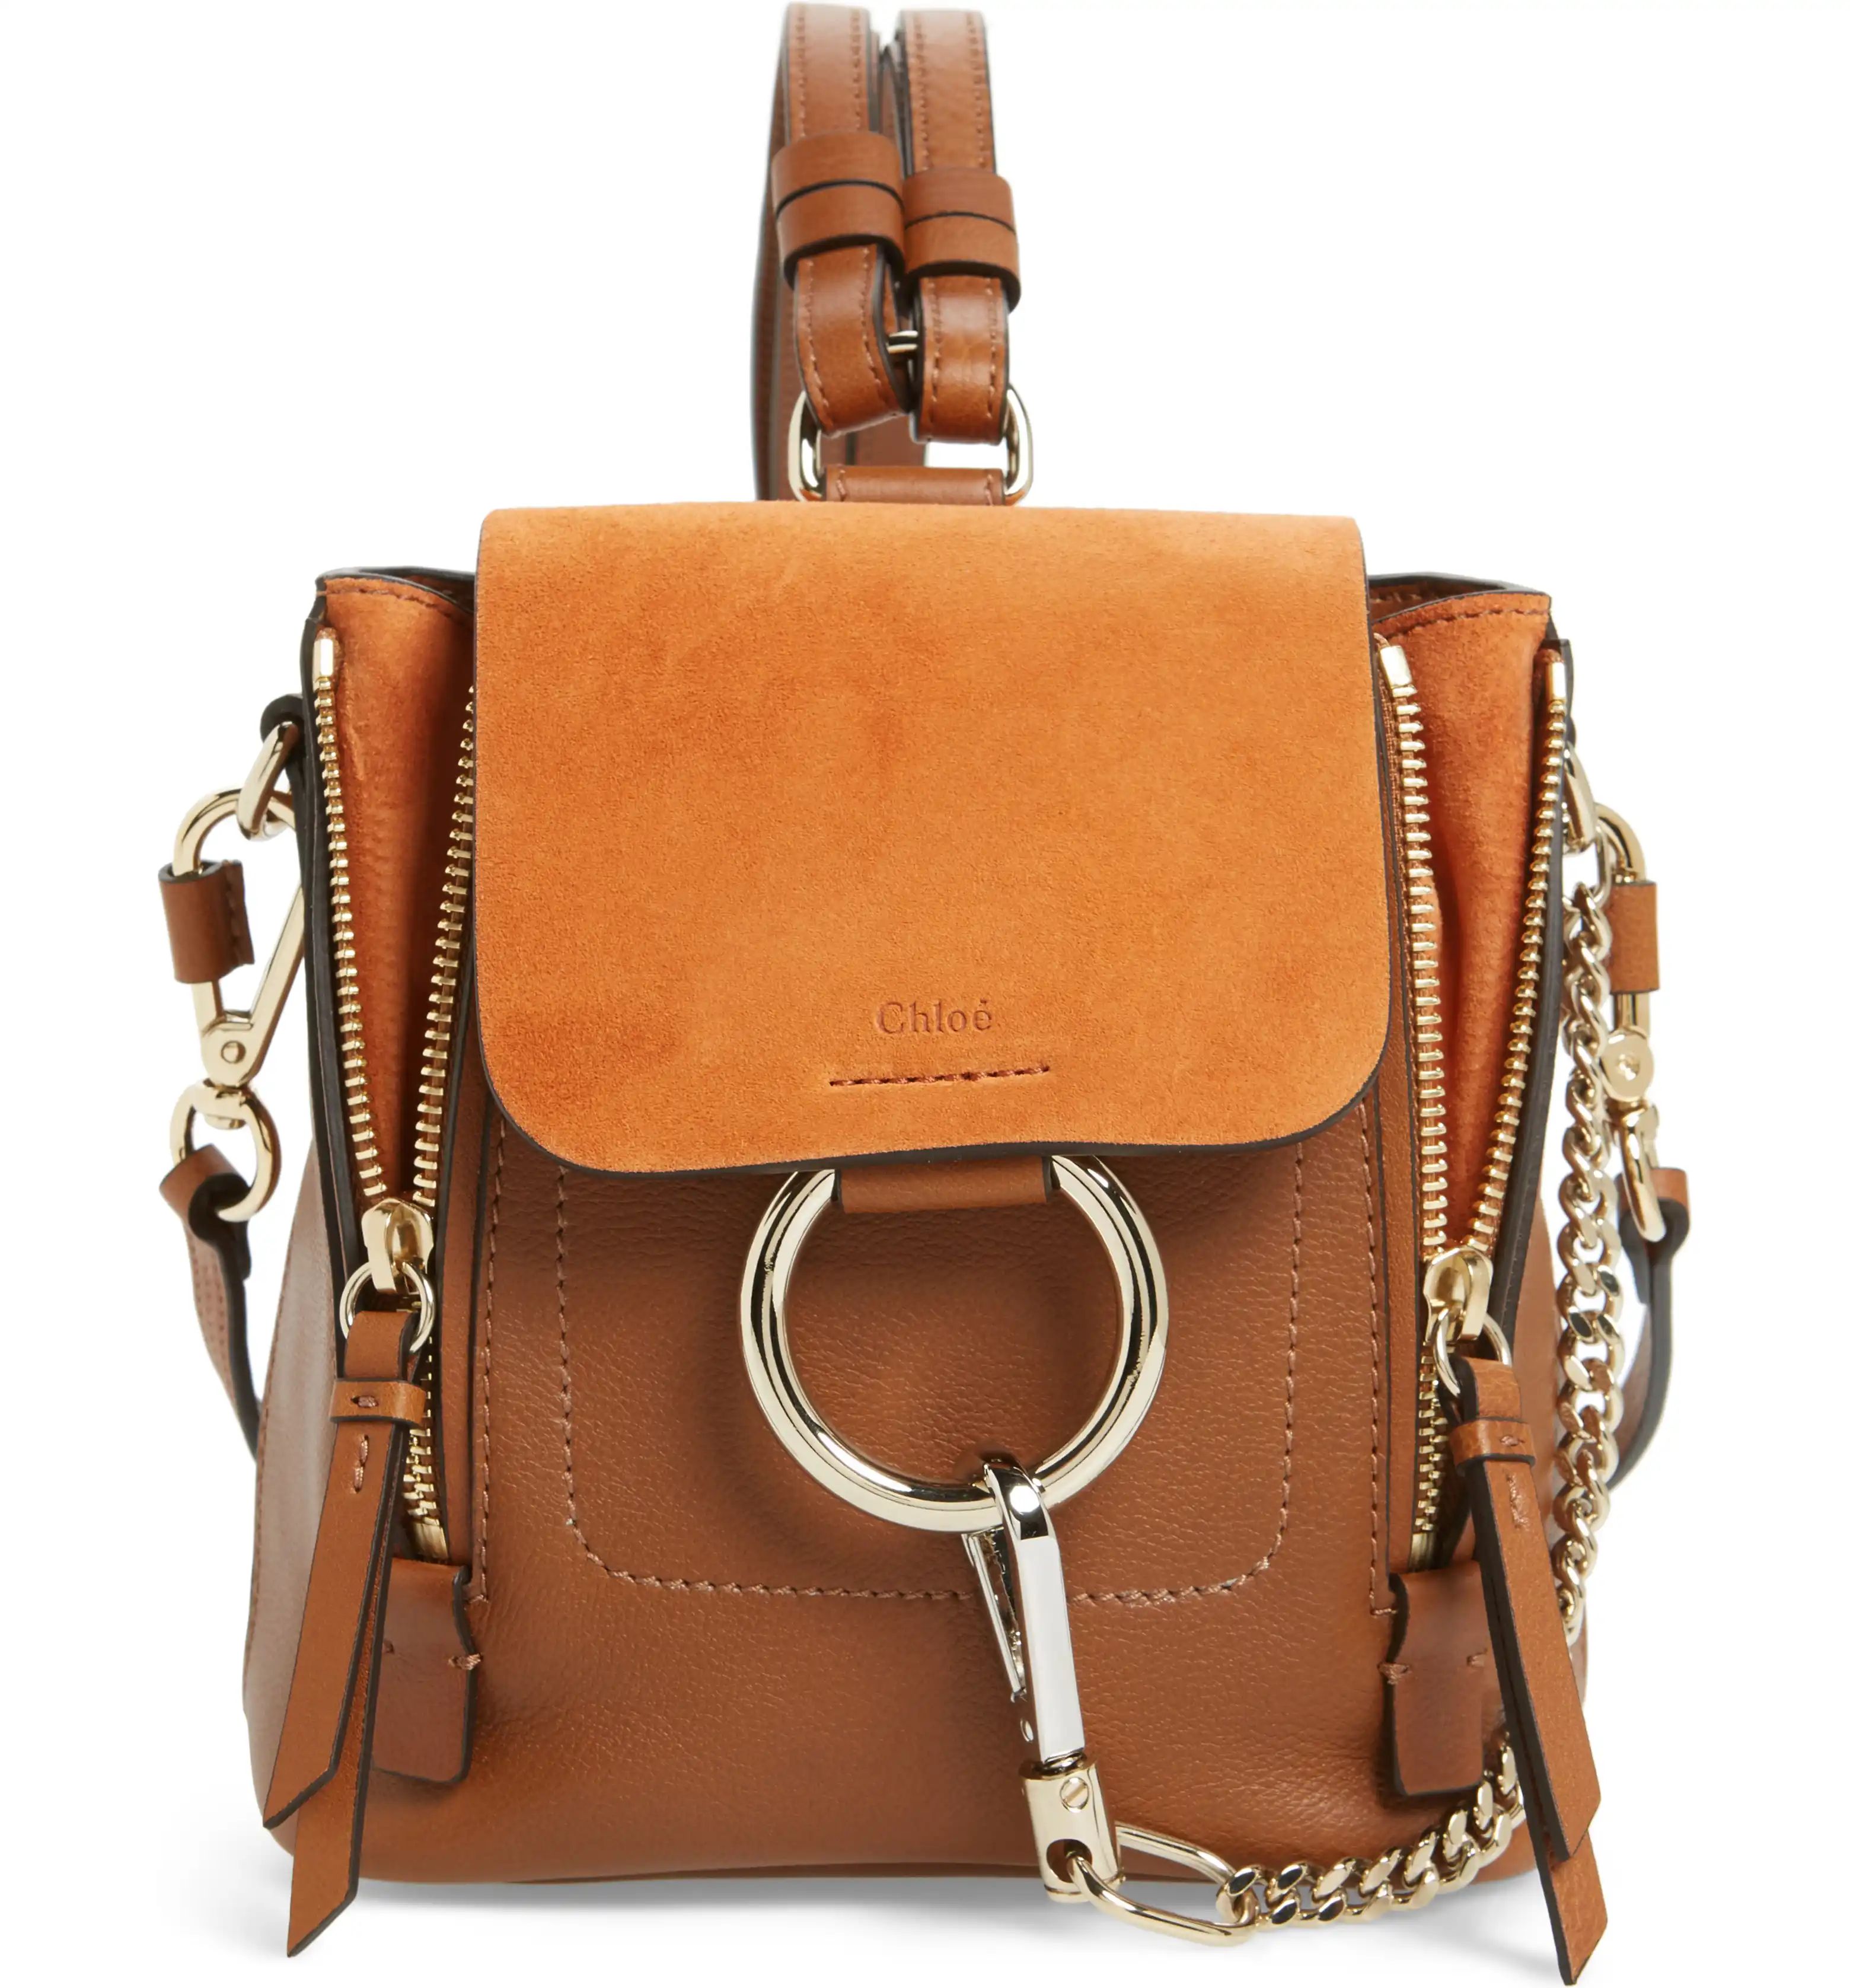 Mini Faye Leather & Suede Backpack | Nordstrom